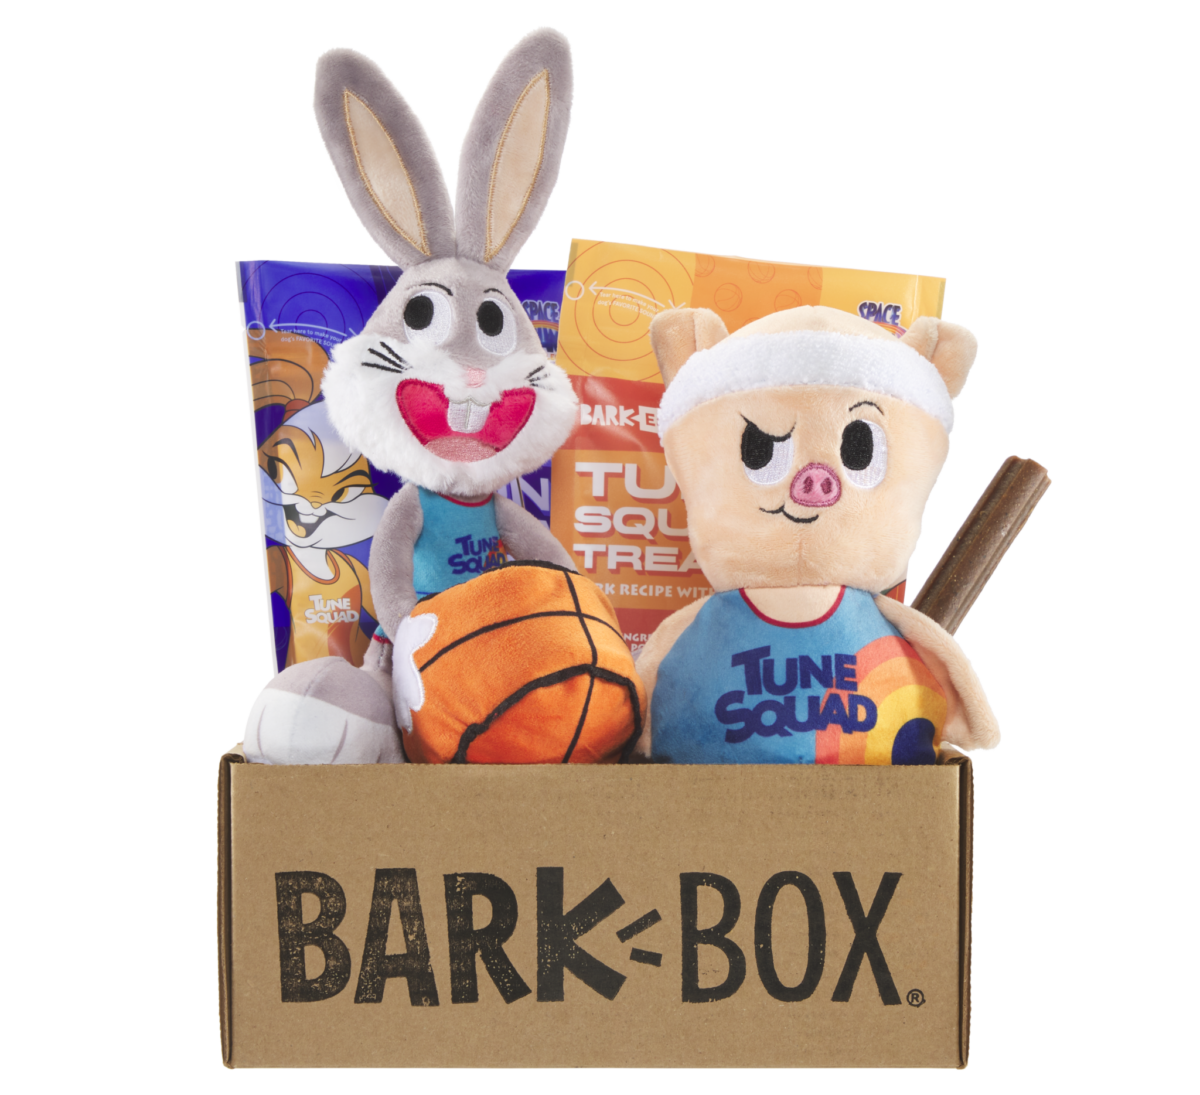 Your Dog’s The MVP On The Tune Squad In July’s BarkBox: “Space Jam: A New Legacy”